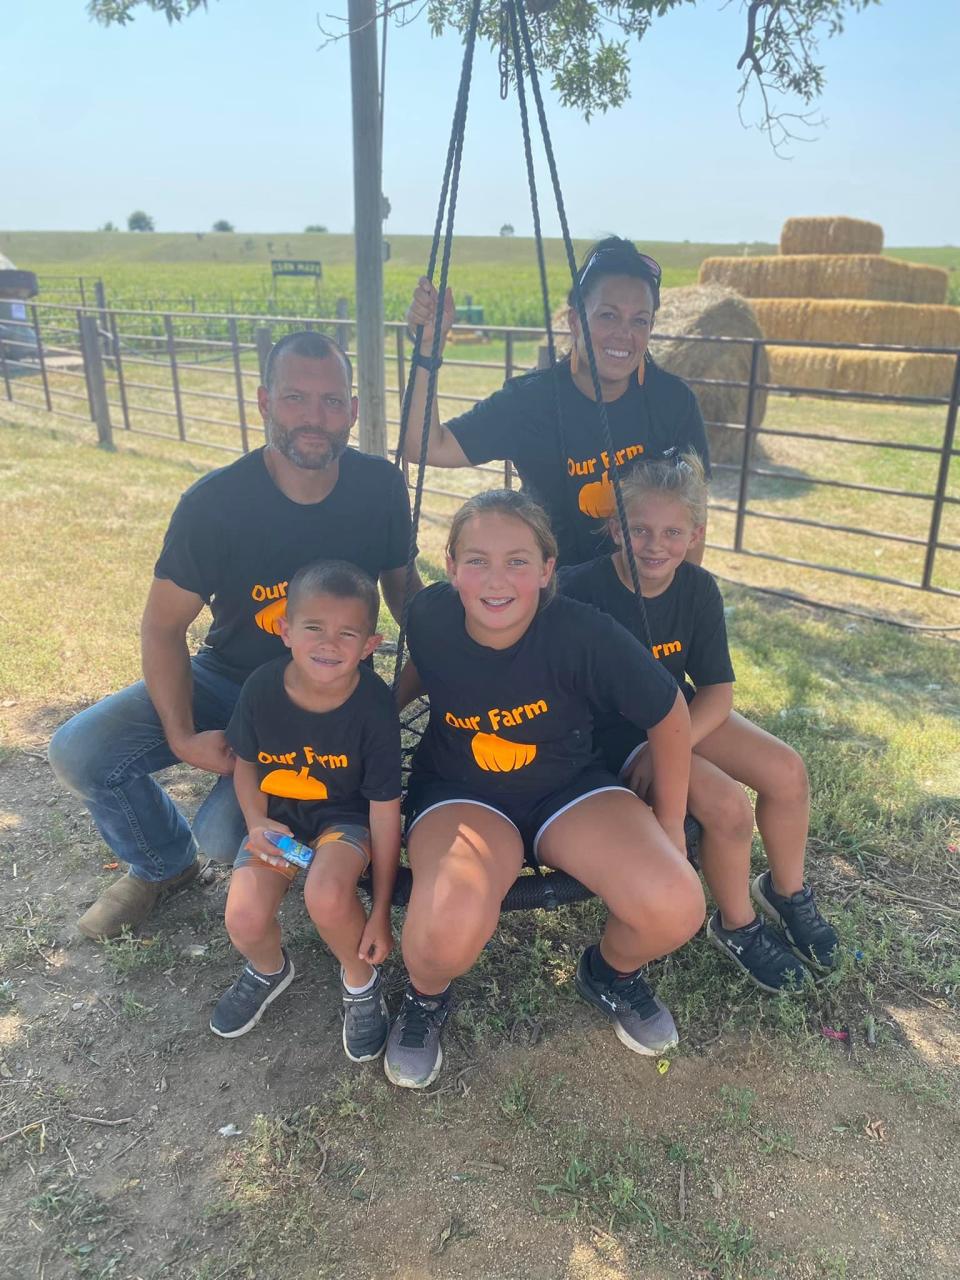 Lane and Brooke Mellegaard, along with their three children, Kase, Melie and Berklie, converted their family farm near Parker, South Dakota, into a fall adventure land for kids and families.